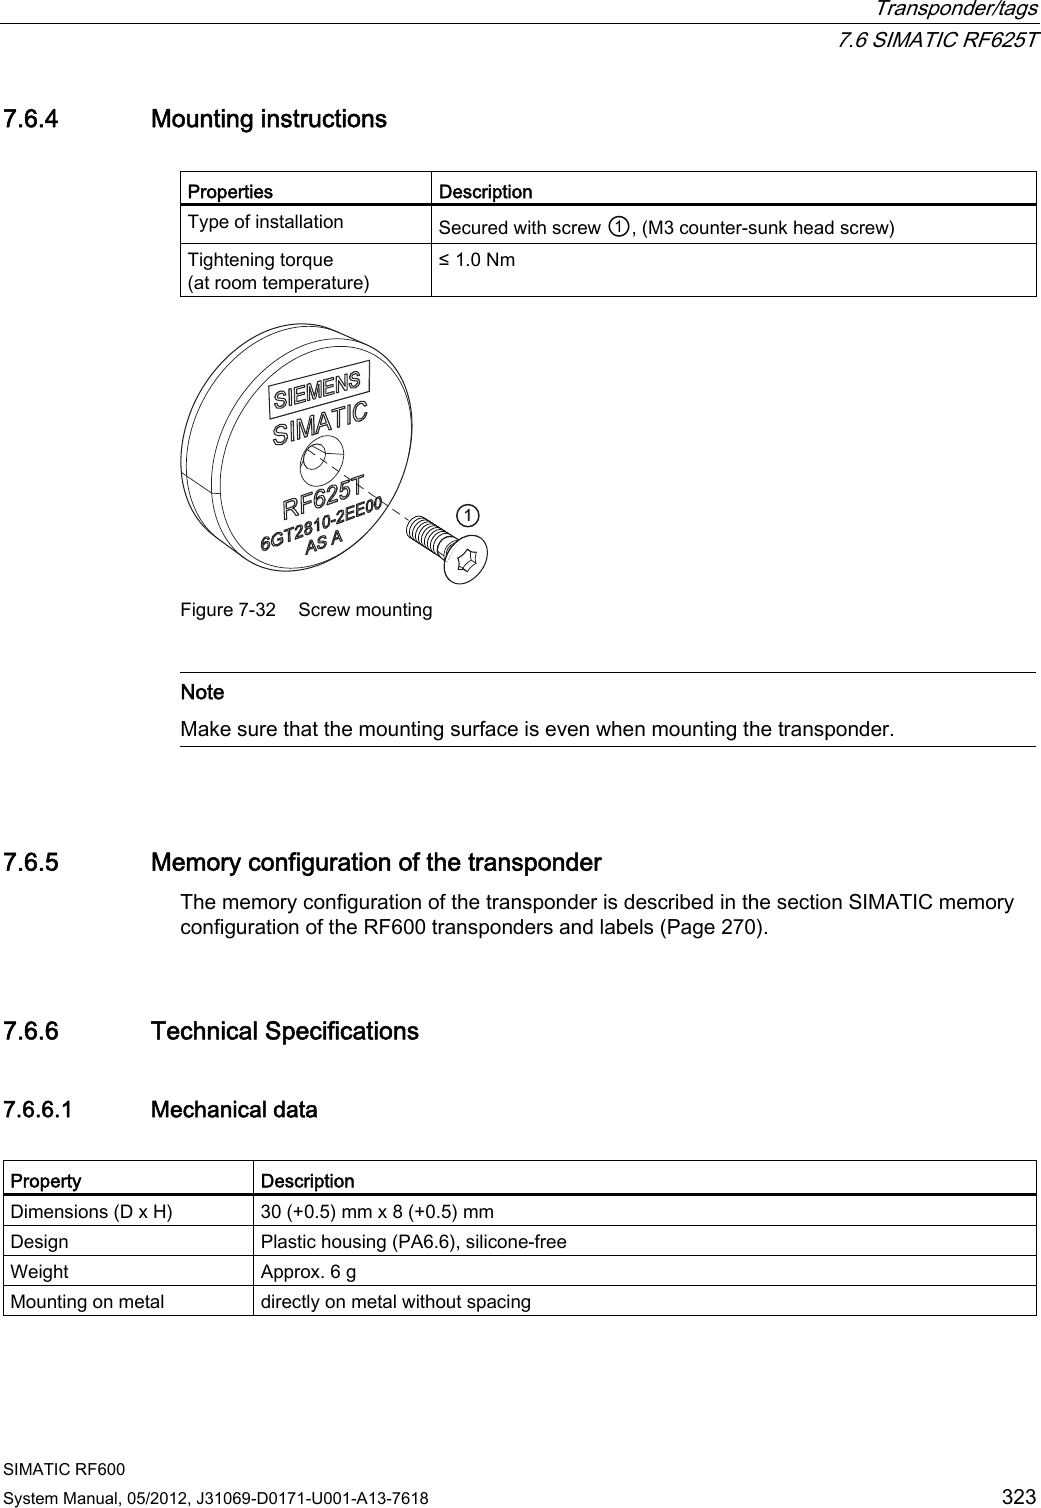  Transponder/tags  7.6 SIMATIC RF625T SIMATIC RF600 System Manual, 05/2012, J31069-D0171-U001-A13-7618  323 7.6.4 Mounting instructions  Properties  Description Type of installation  Secured with screw ①, (M3 counter-sunk head screw) Tightening torque (at room temperature) ≤ 1.0 Nm  Figure 7-32  Screw mounting   Note Make sure that the mounting surface is even when mounting the transponder.  7.6.5 Memory configuration of the transponder The memory configuration of the transponder is described in the section SIMATIC memory configuration of the RF600 transponders and labels (Page 270). 7.6.6 Technical Specifications 7.6.6.1 Mechanical data  Property  Description Dimensions (D x H)  30 (+0.5) mm x 8 (+0.5) mm Design  Plastic housing (PA6.6), silicone-free Weight  Approx. 6 g Mounting on metal  directly on metal without spacing 